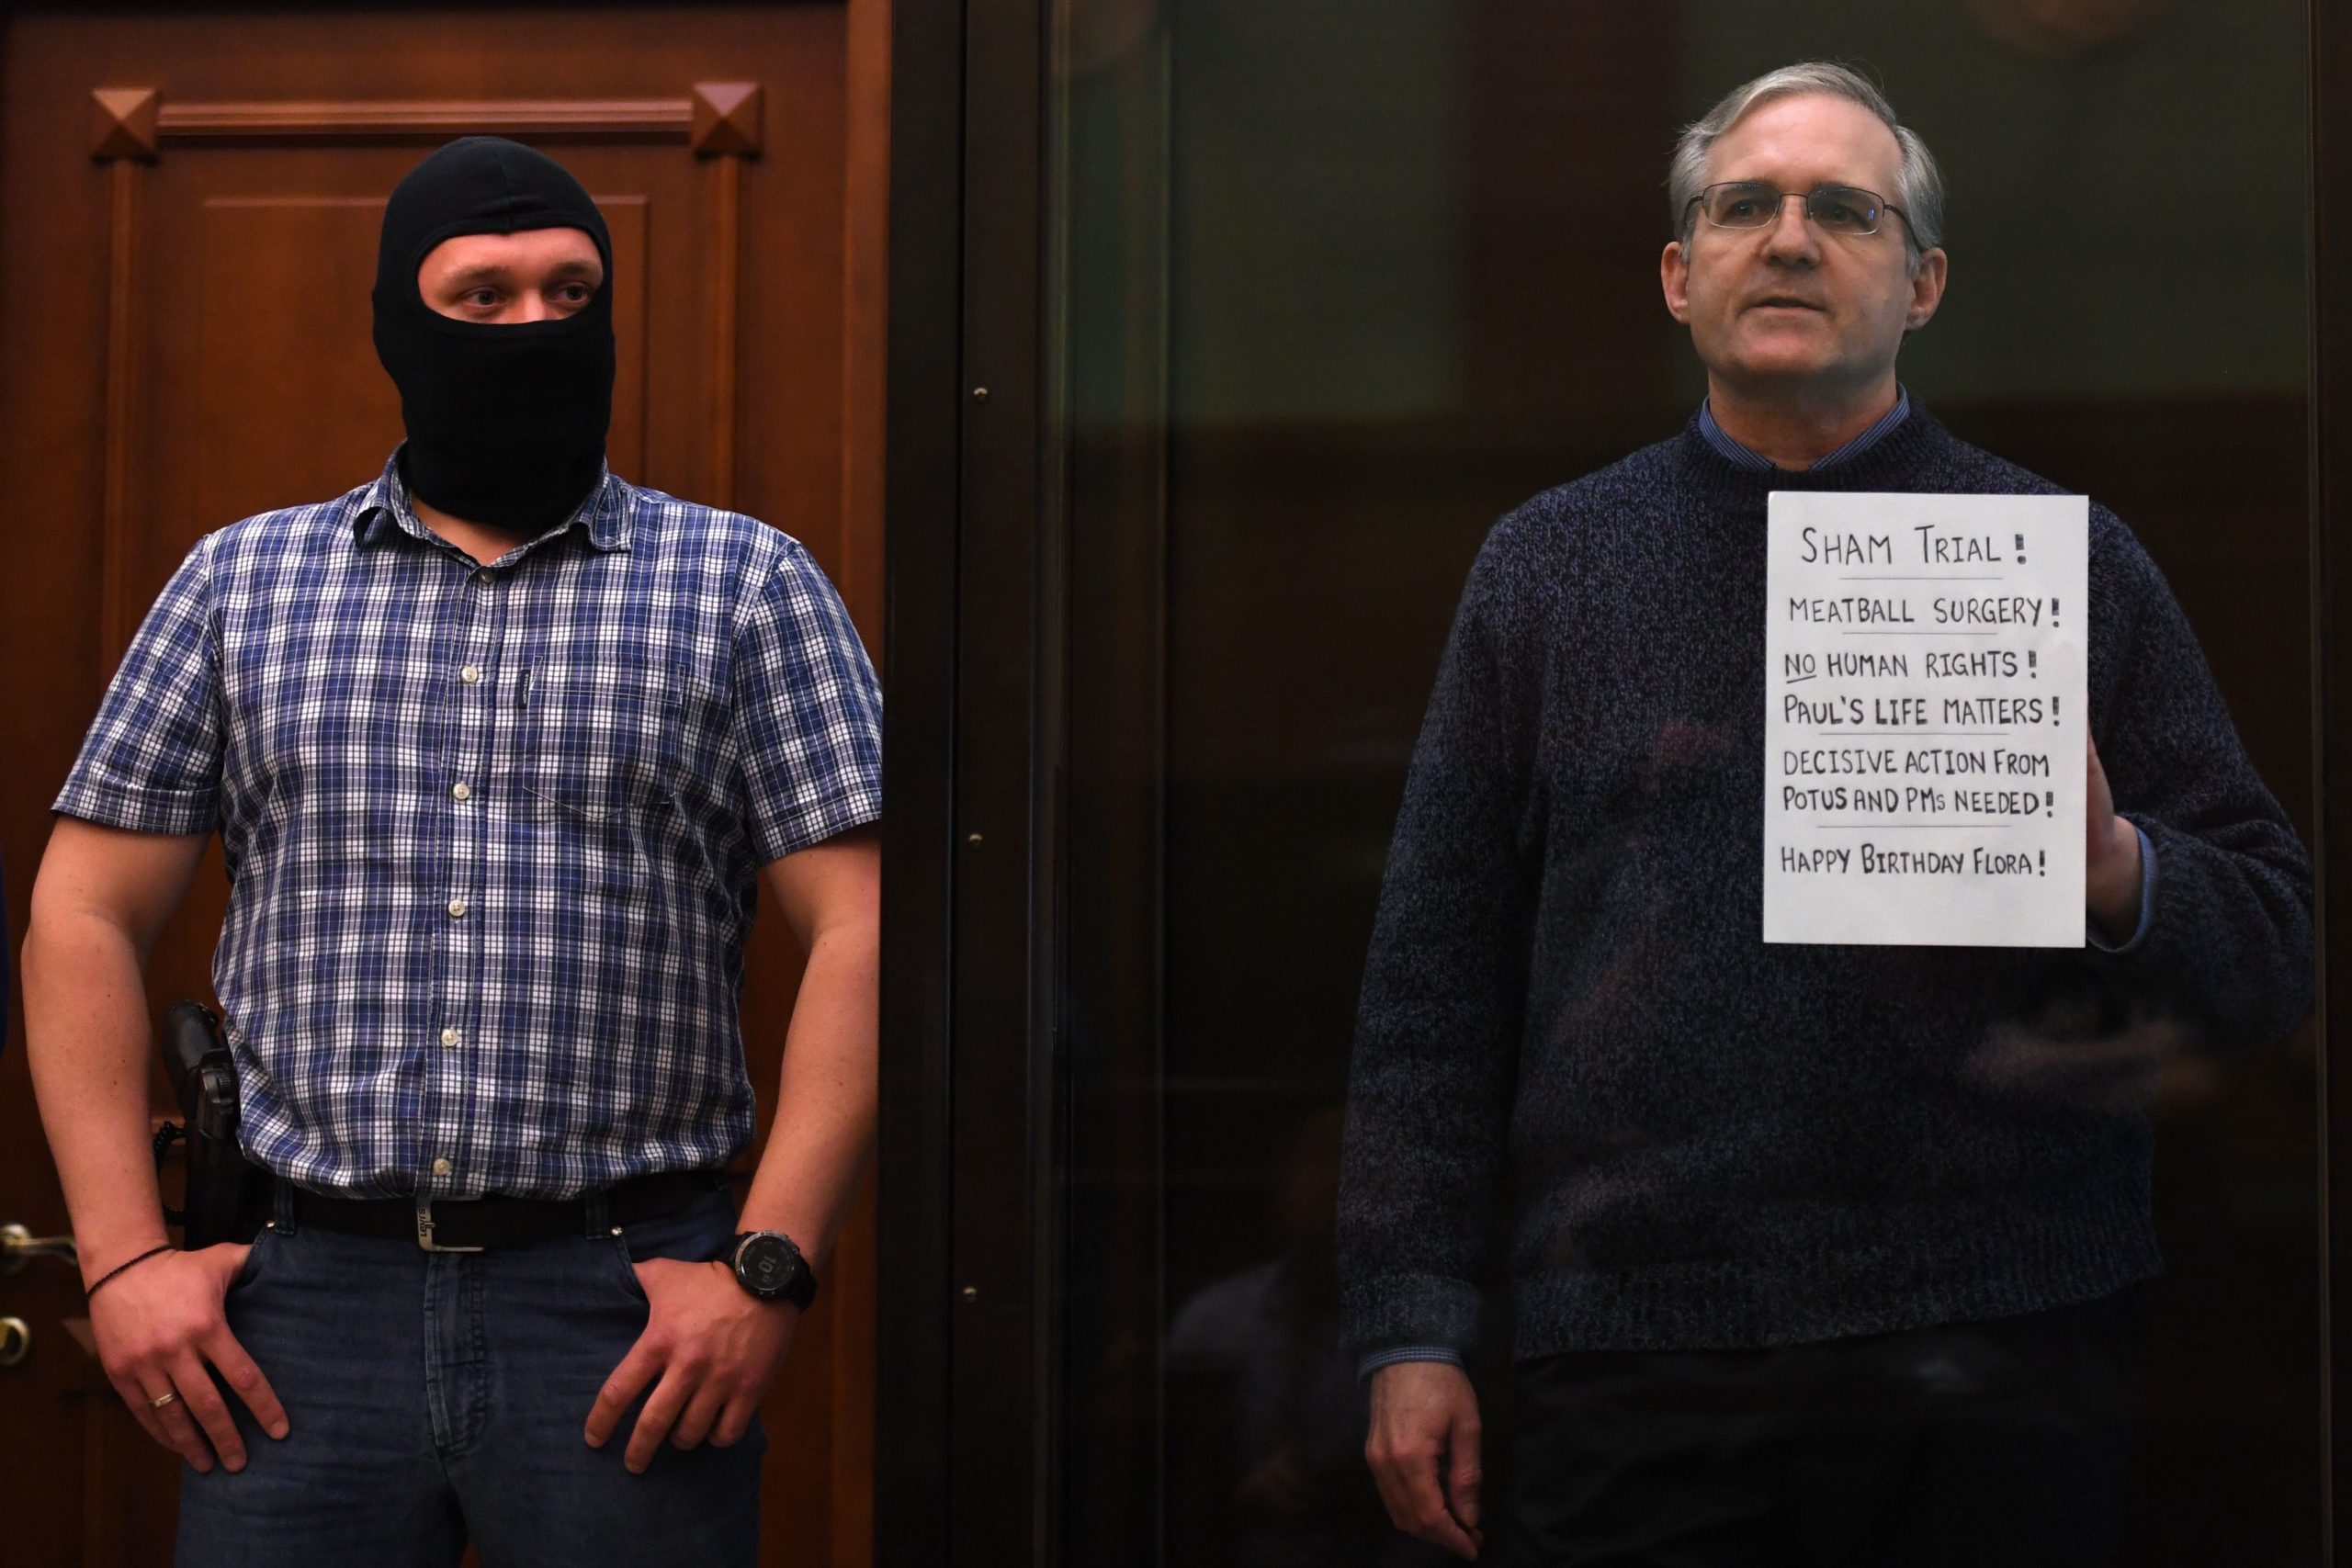 Paul Whelan stands inside a defendants' cage as he waits to hear the verdict of his case in a Moscow, Russia court on June 15, 2020. (Kirill Kudryavtsev/AFP via Getty Images)